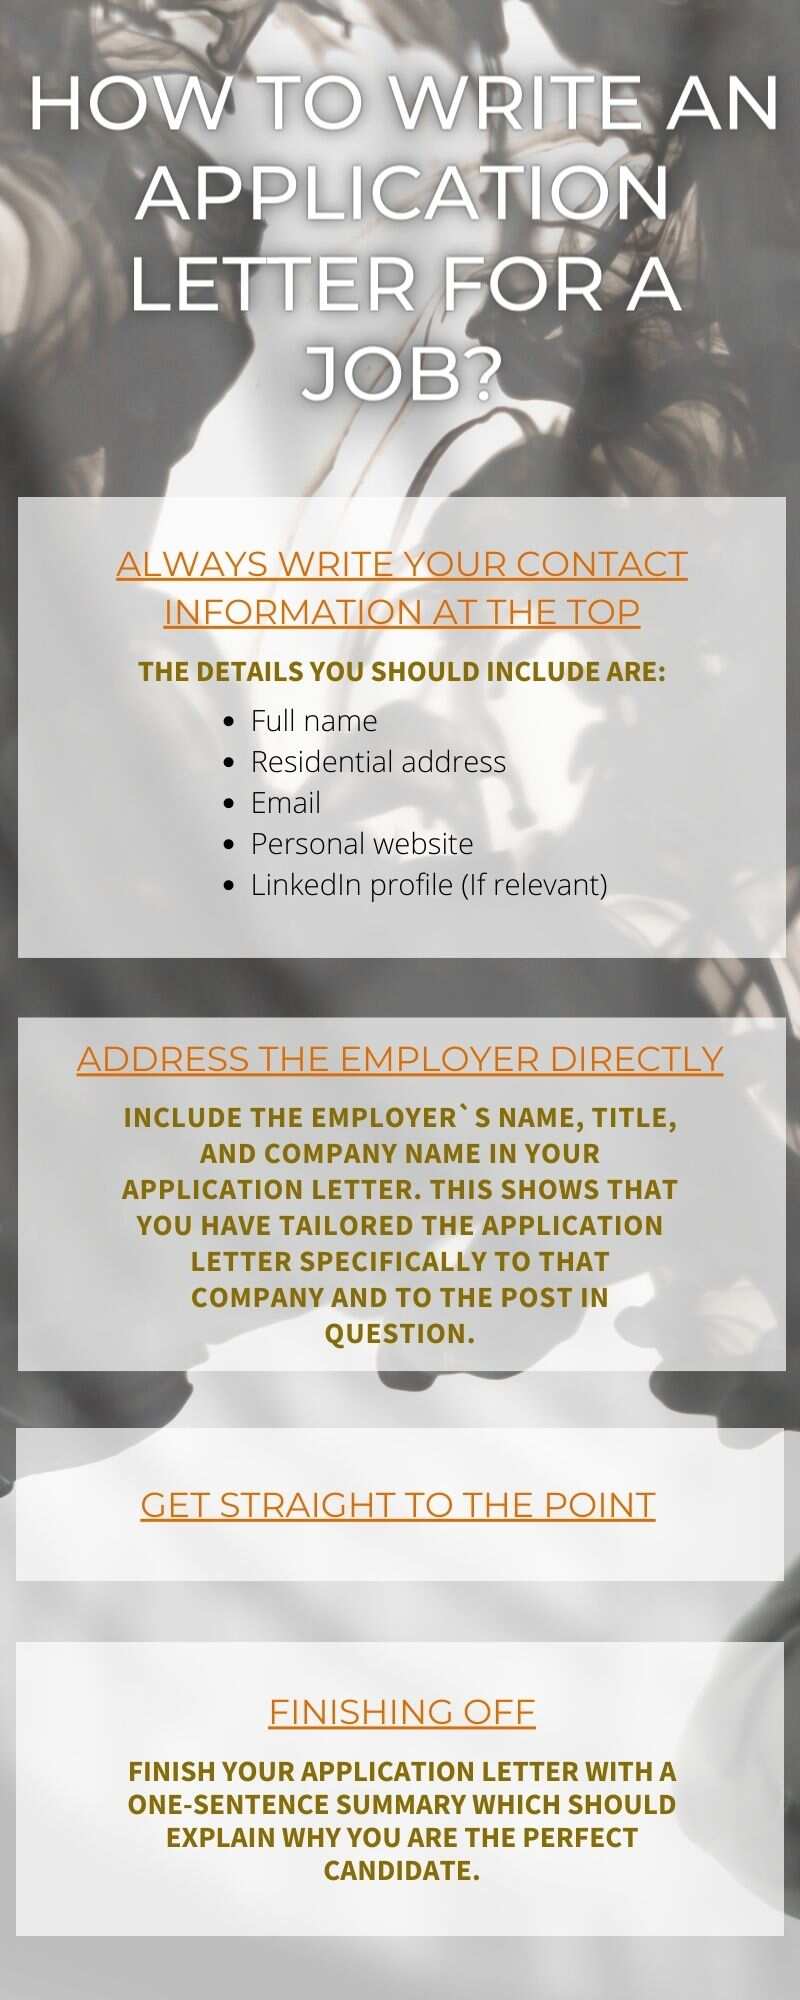 How to write an application letter for a job? (27 guide) ▷ Legit.ng